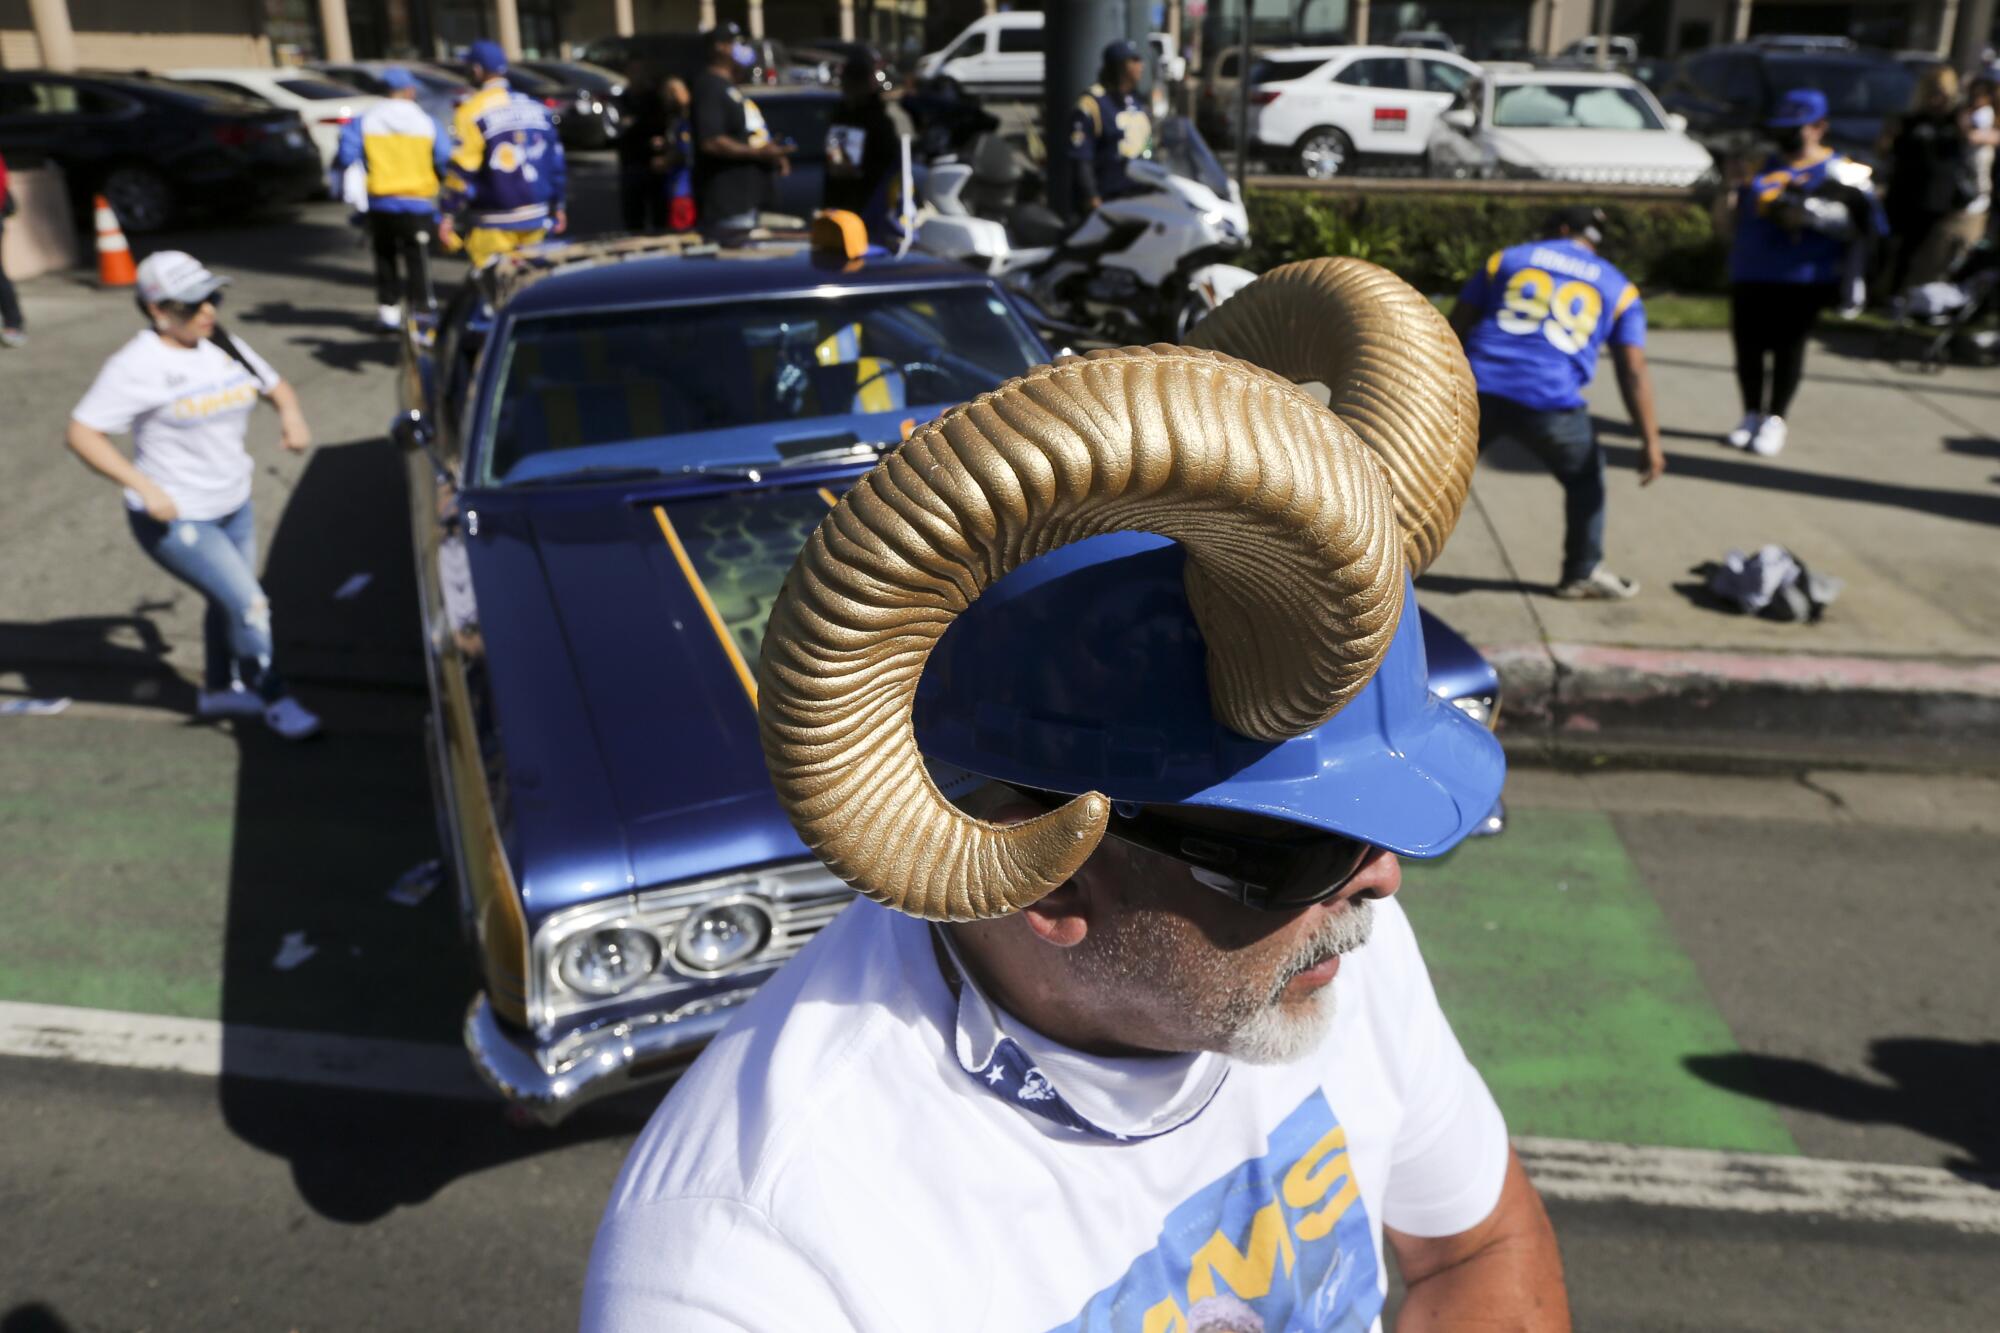 Rams fans celebrate Super Bowl parade in L.A. - Los Angeles Times